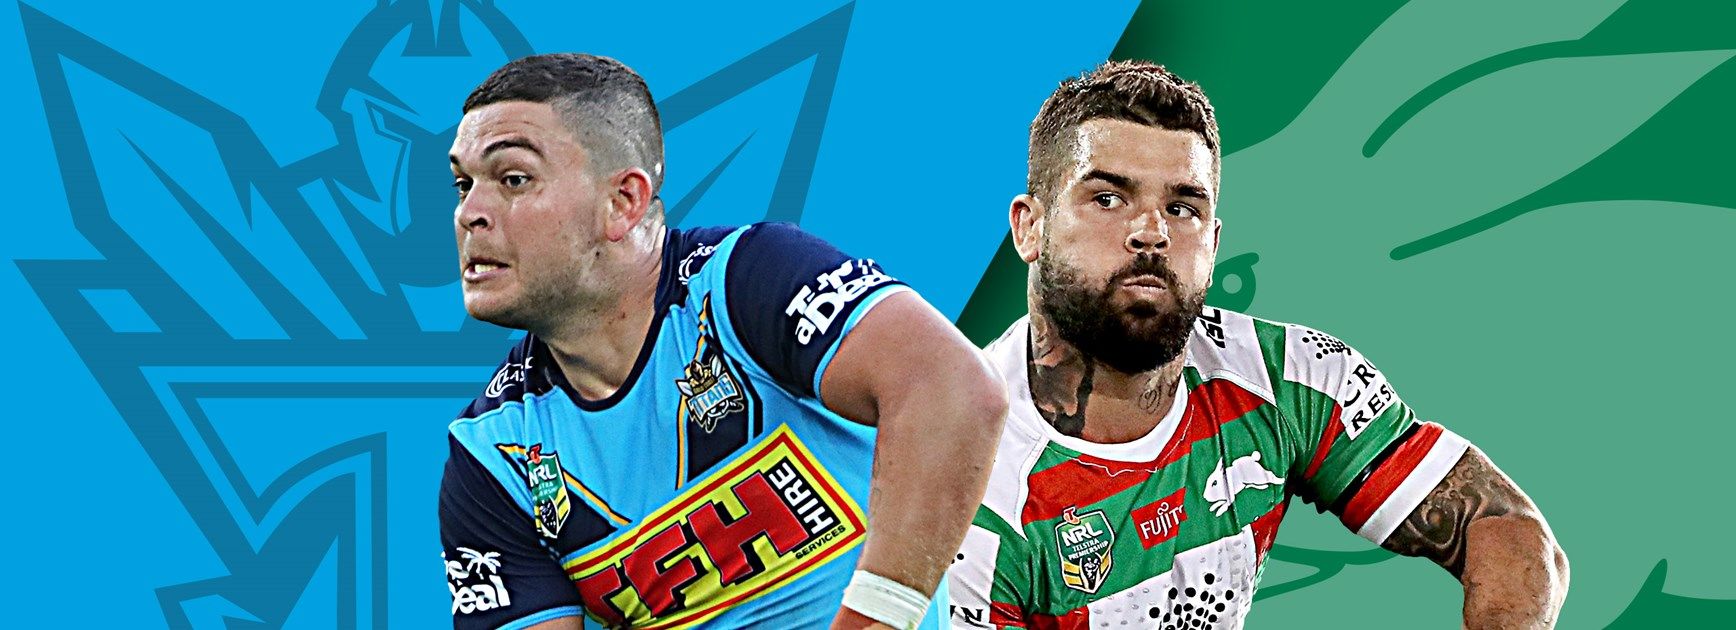 Gold Coast Titans vs. South Sydney Rabbittohs Prediction, Betting Tips & Odds │11 JUNE, 2022